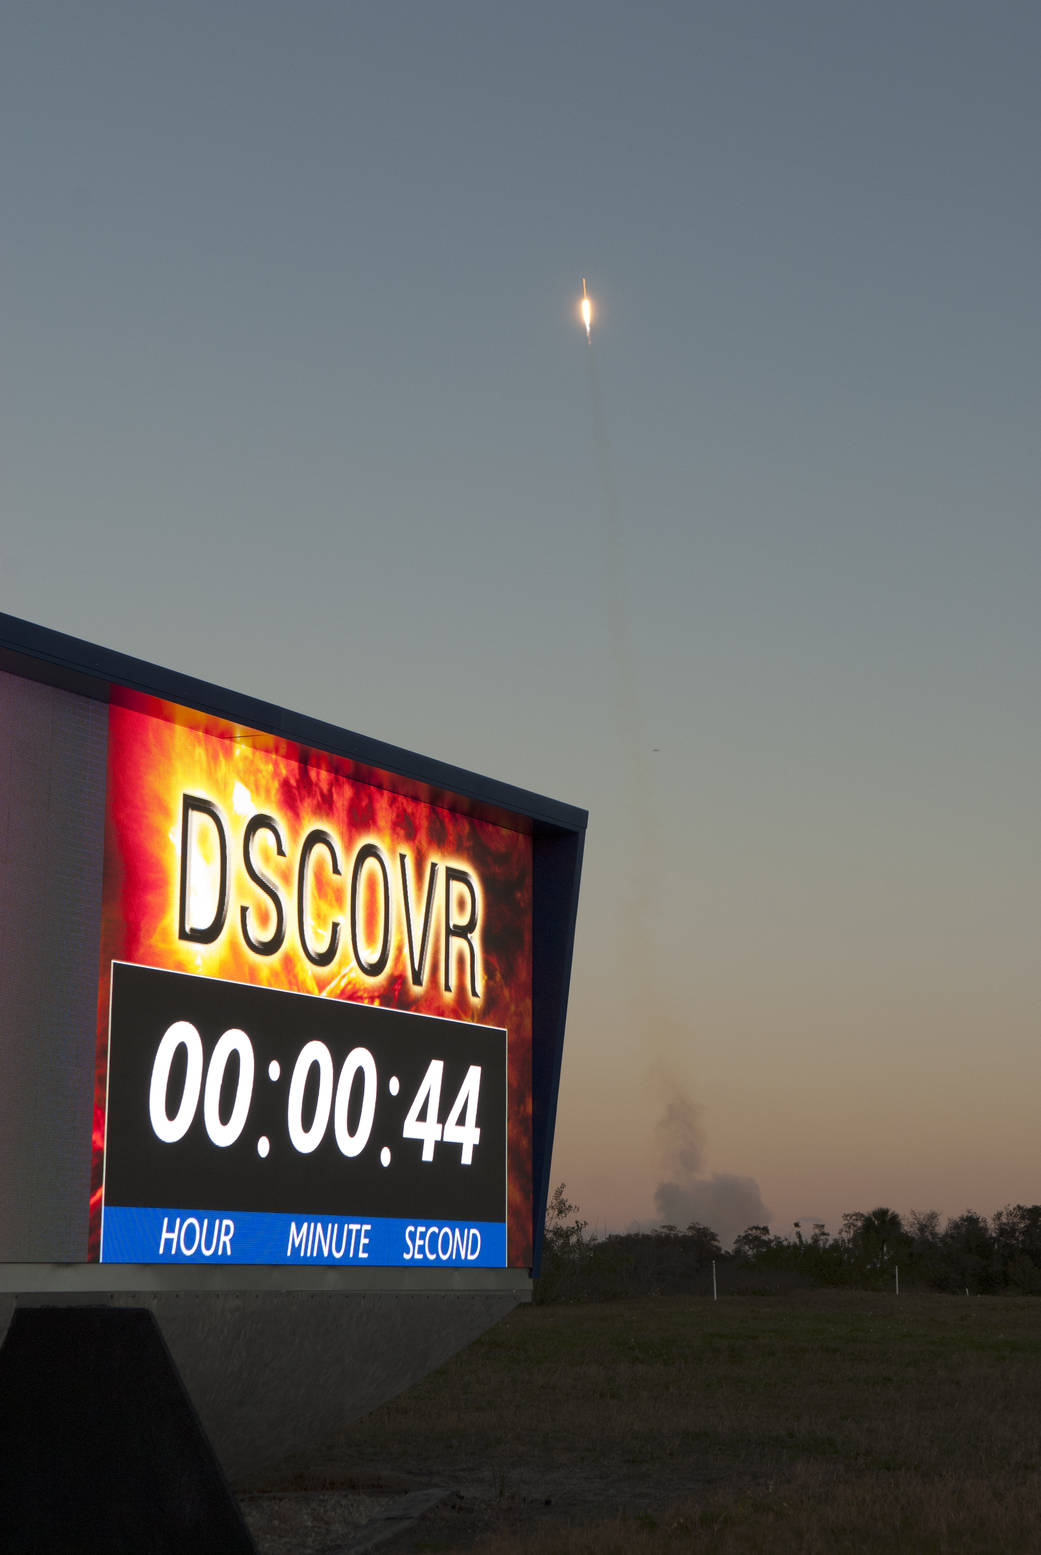 launch of DSCOVR, with countdown clock (reading 44 seconds after liftoff) in foreground